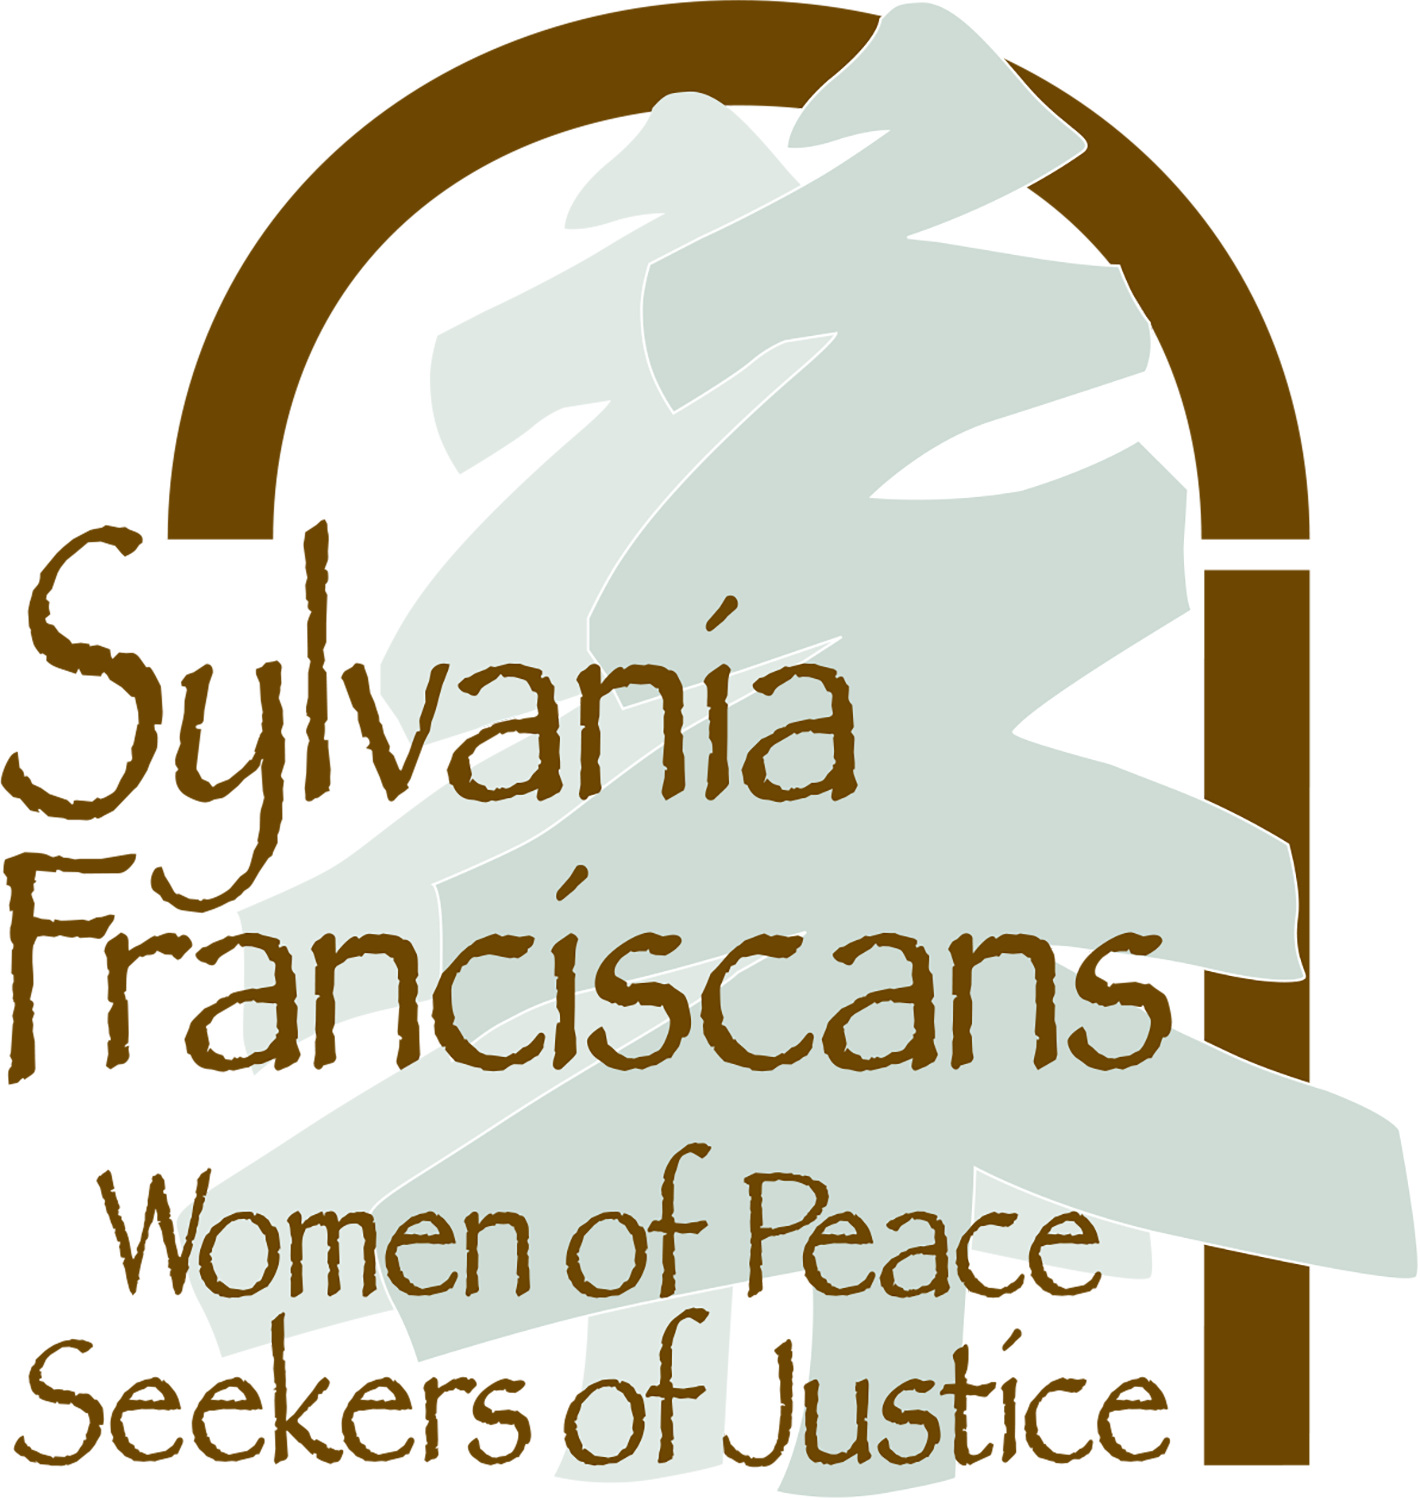 Sisters of St. Francis Logo